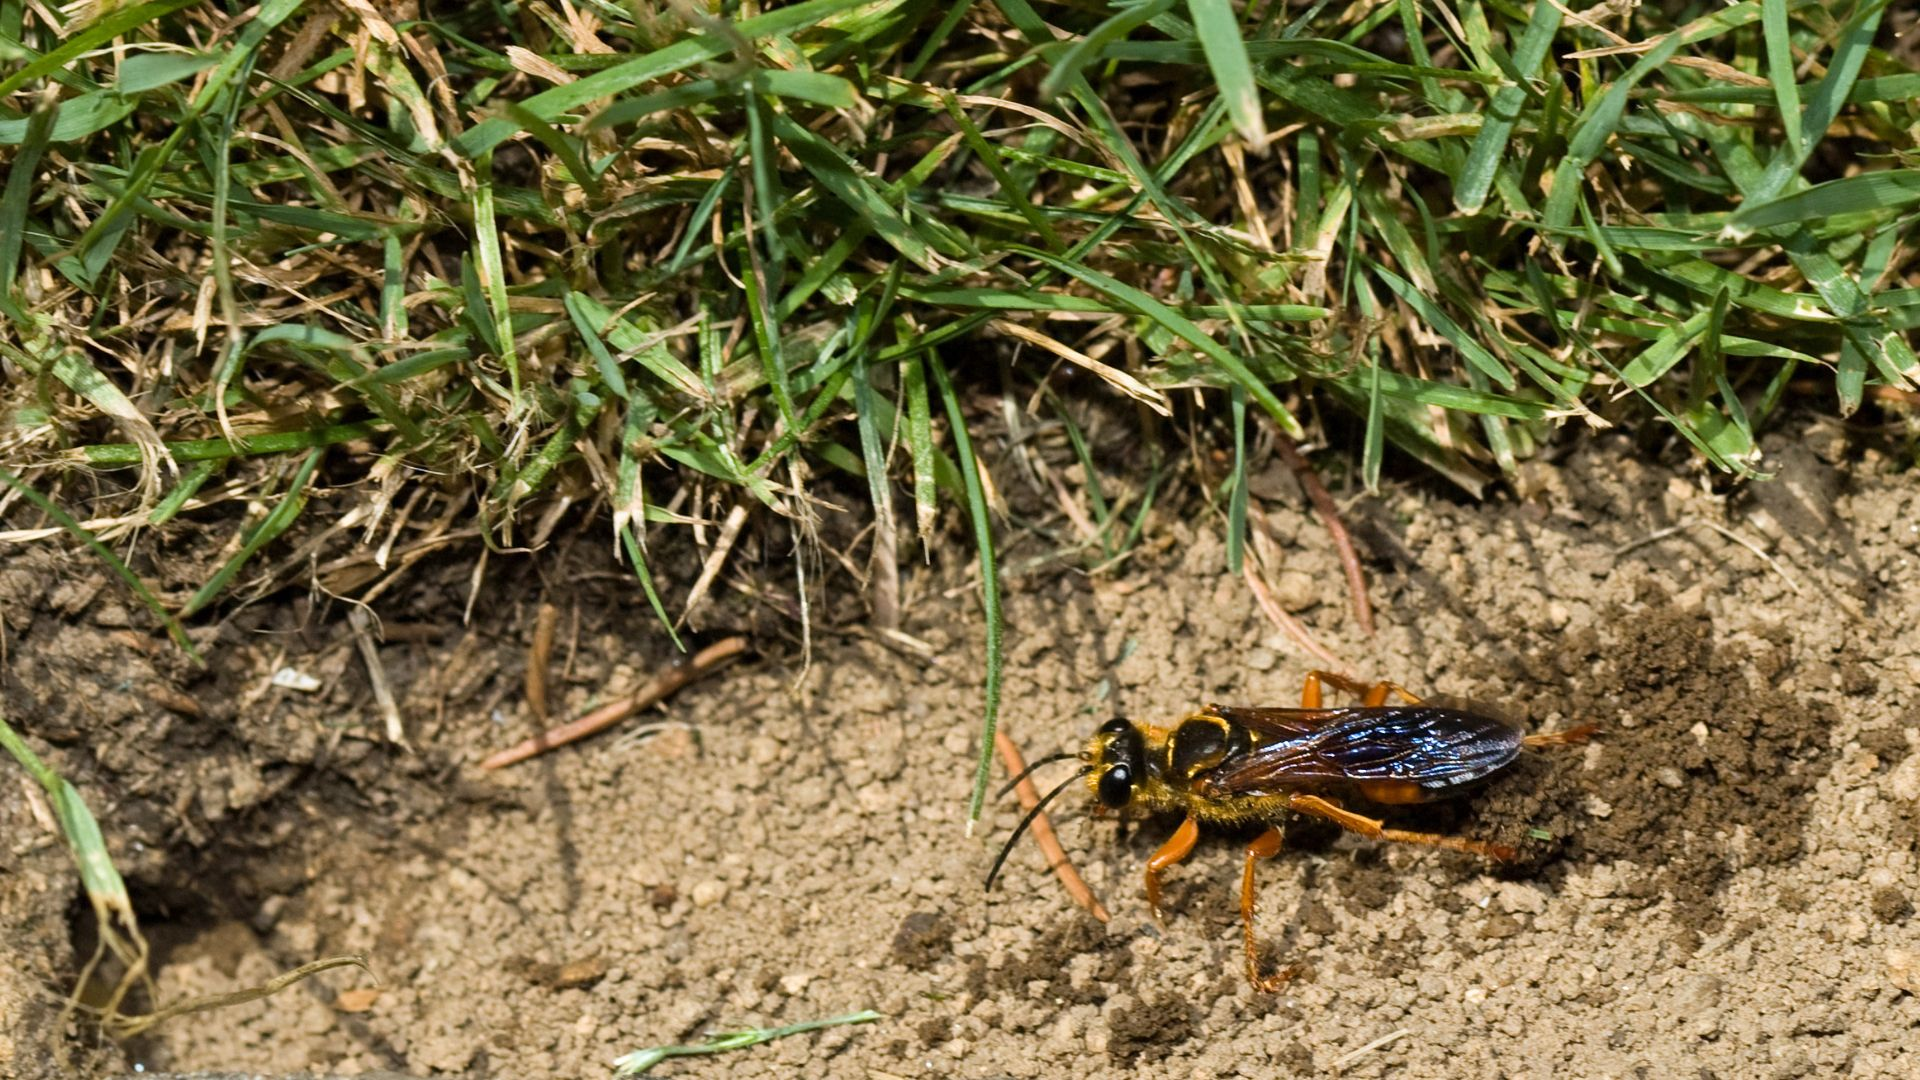 An image of a cicada killer wasp burrowing a hole in a lawn.